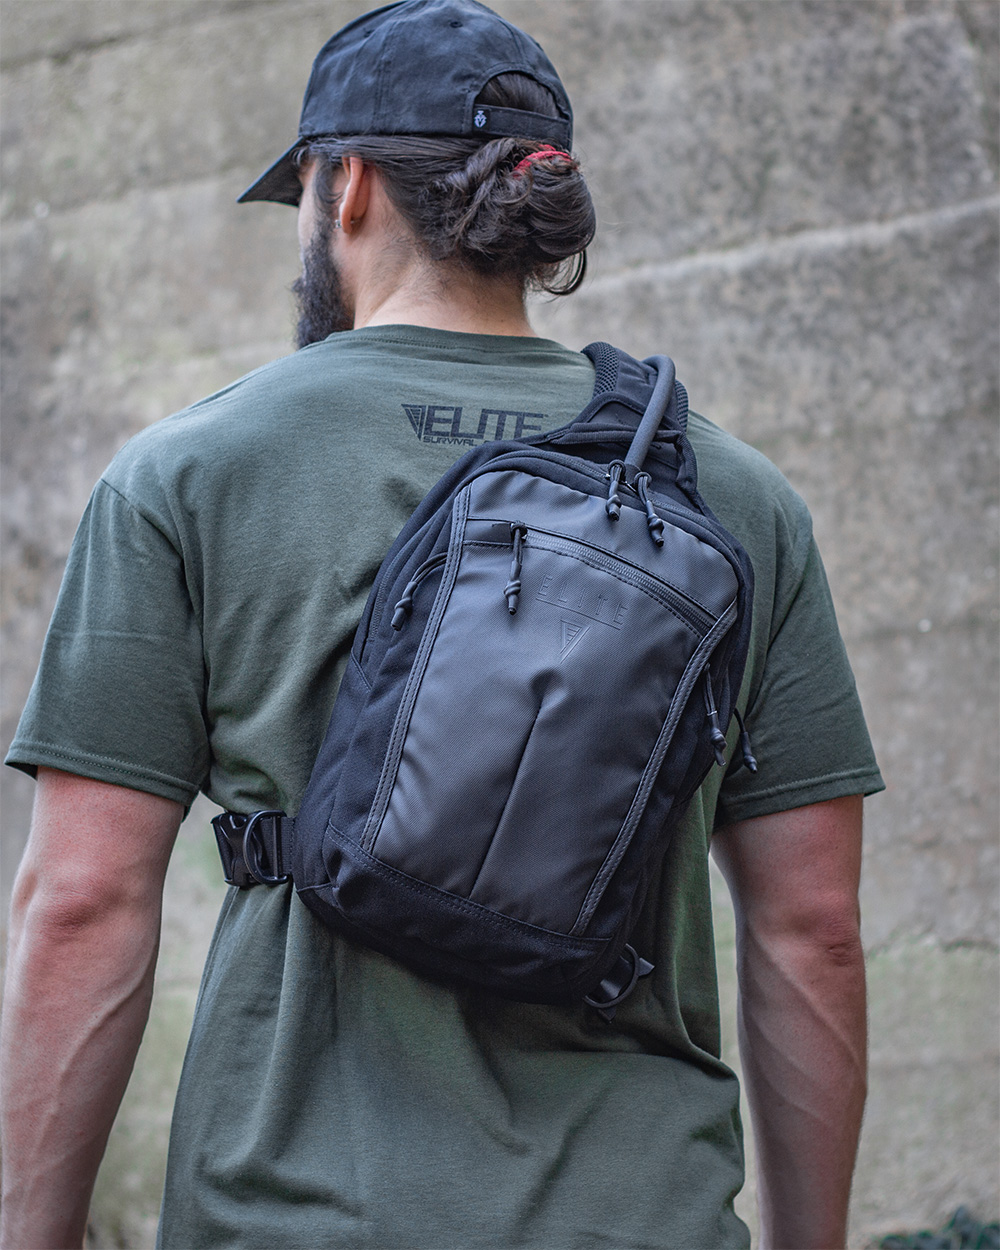 Blindside Concealed Carry Slingpack with Front Pocket for Handgun and Multiple Compartments for Organization